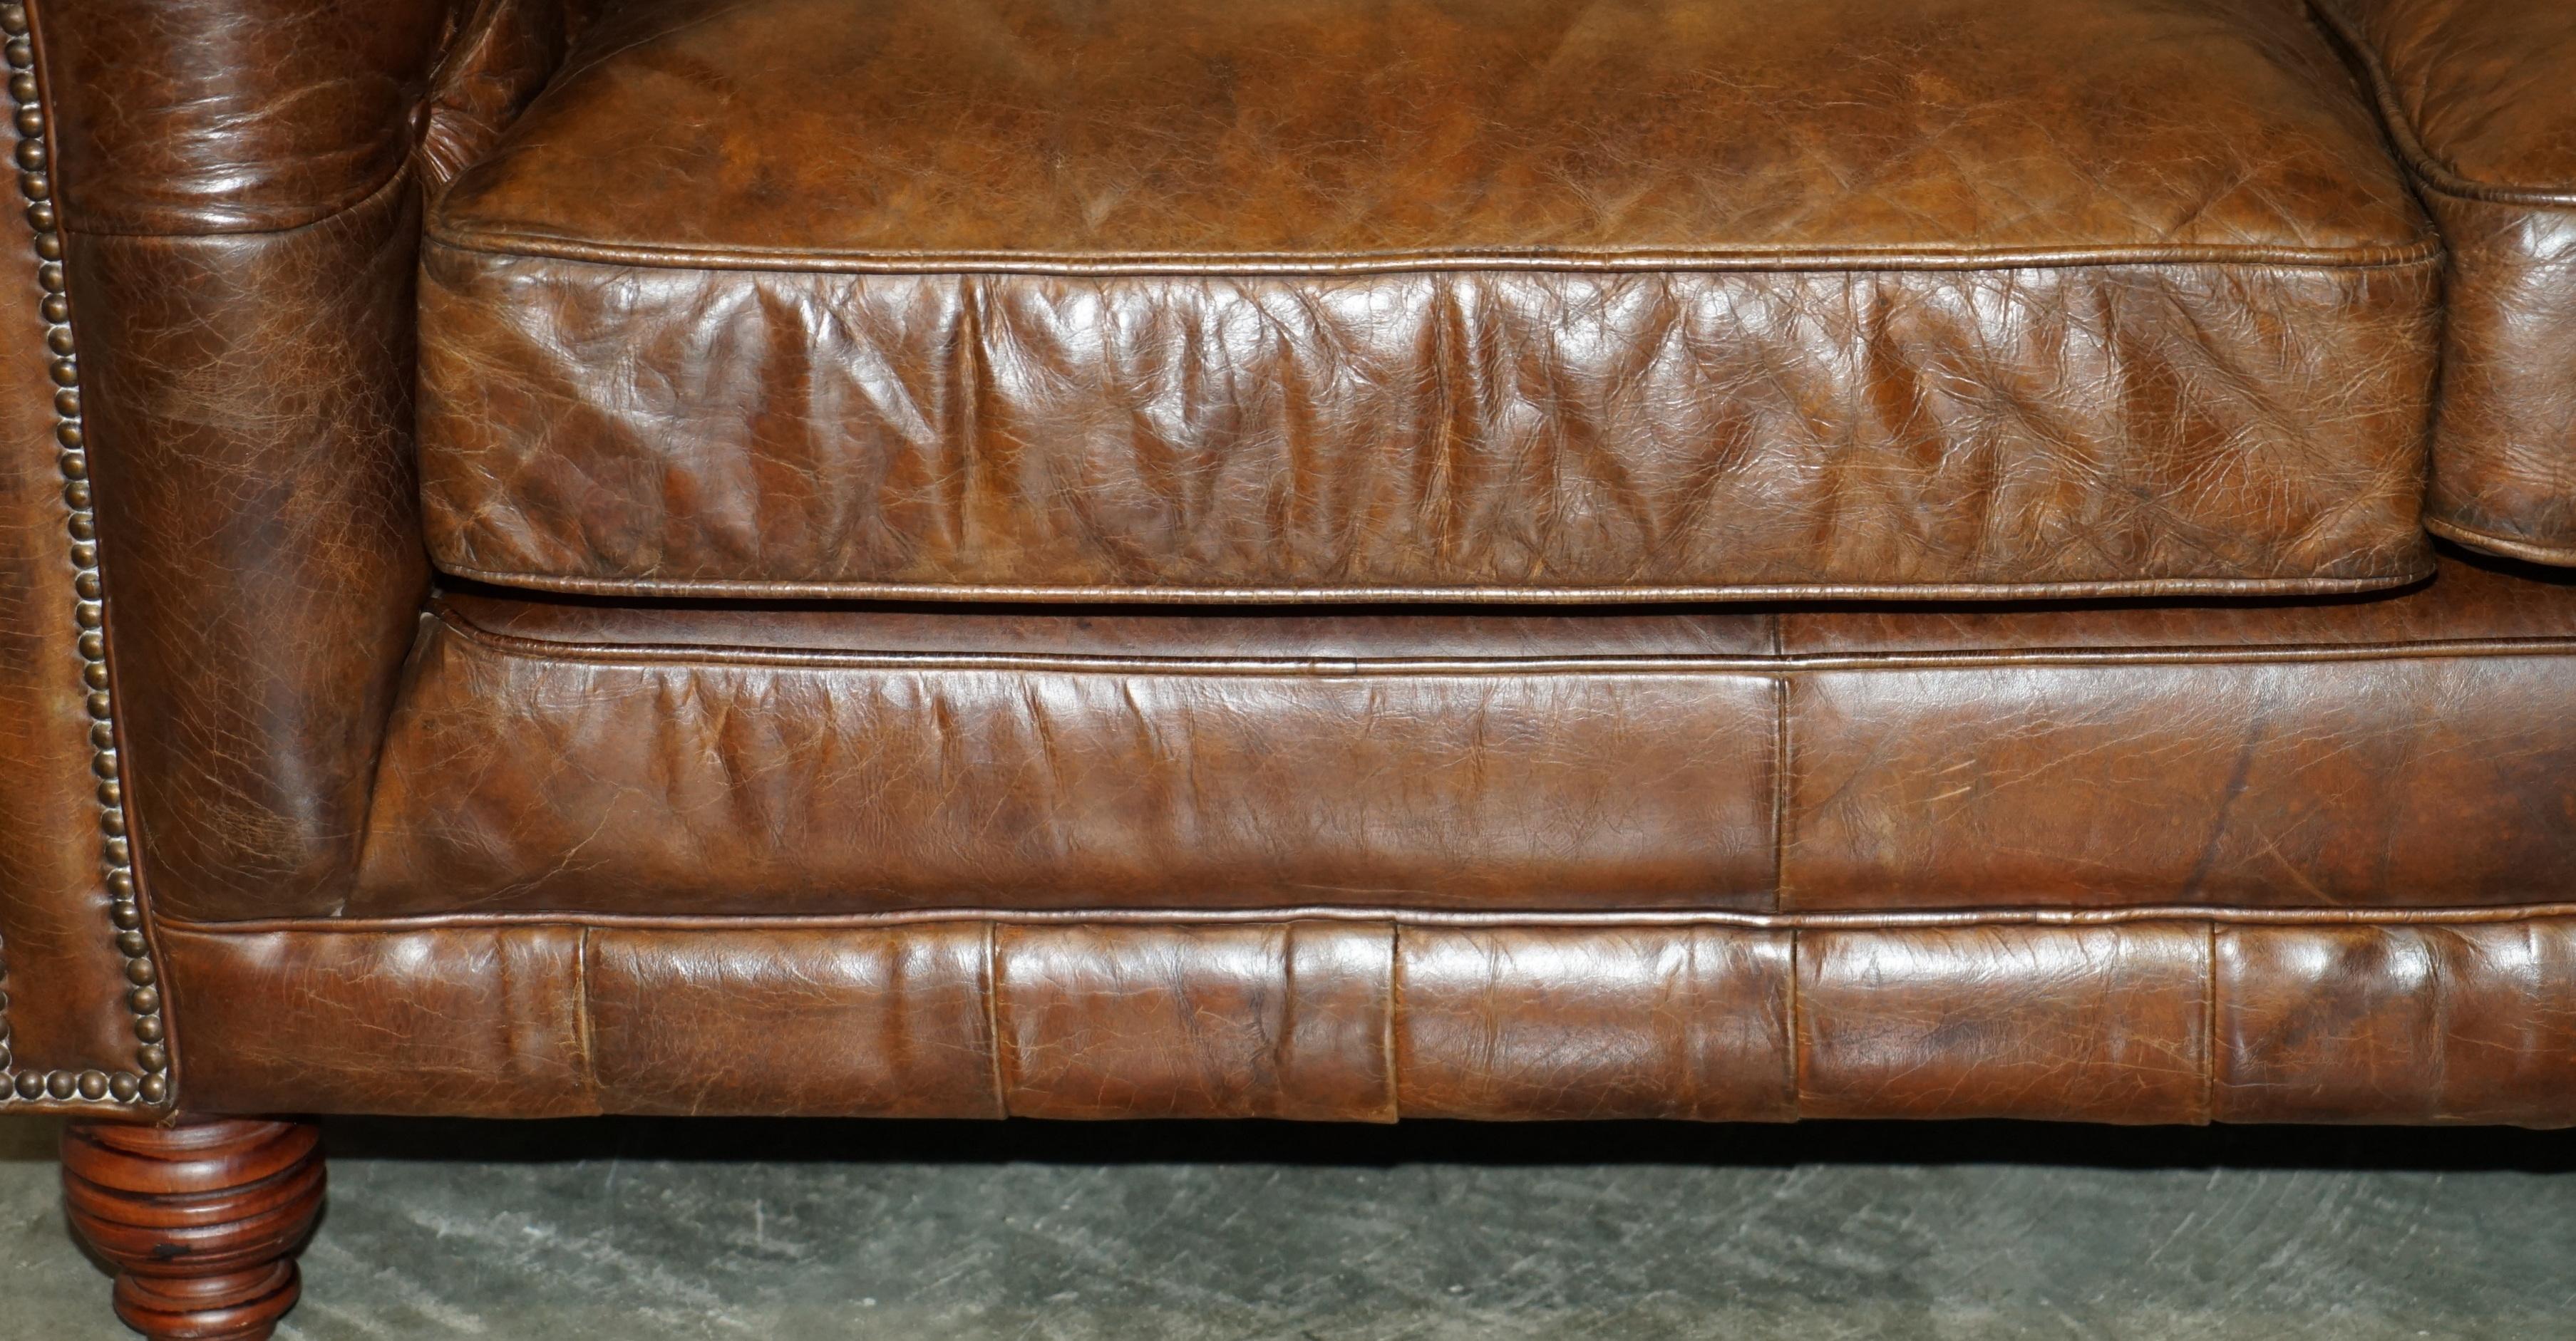 1 von 2 TIMOTHY OULTON HERiTAGE BROWN VINTAGE LEATHER CHESTERFIELD HALO SOFAS im Angebot 18